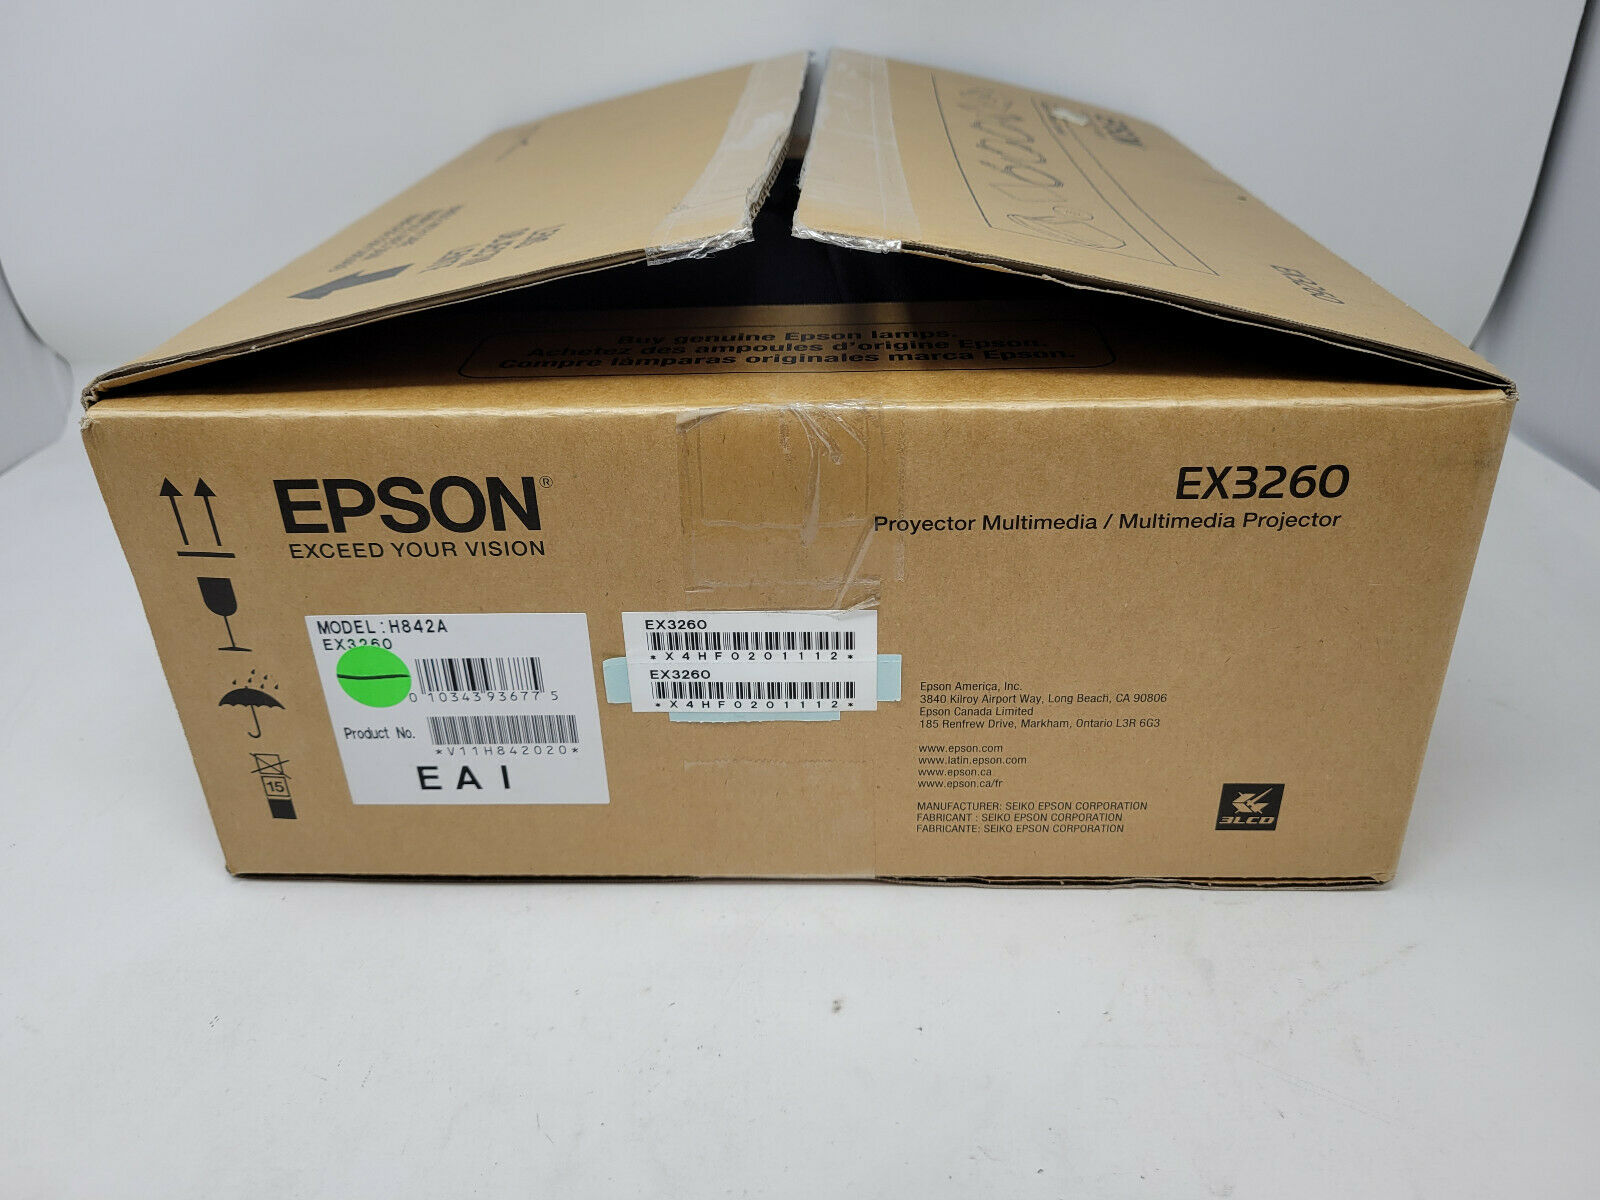 Epson Ex3260 Svga 3lcd Projector - 0 Hours Open Box